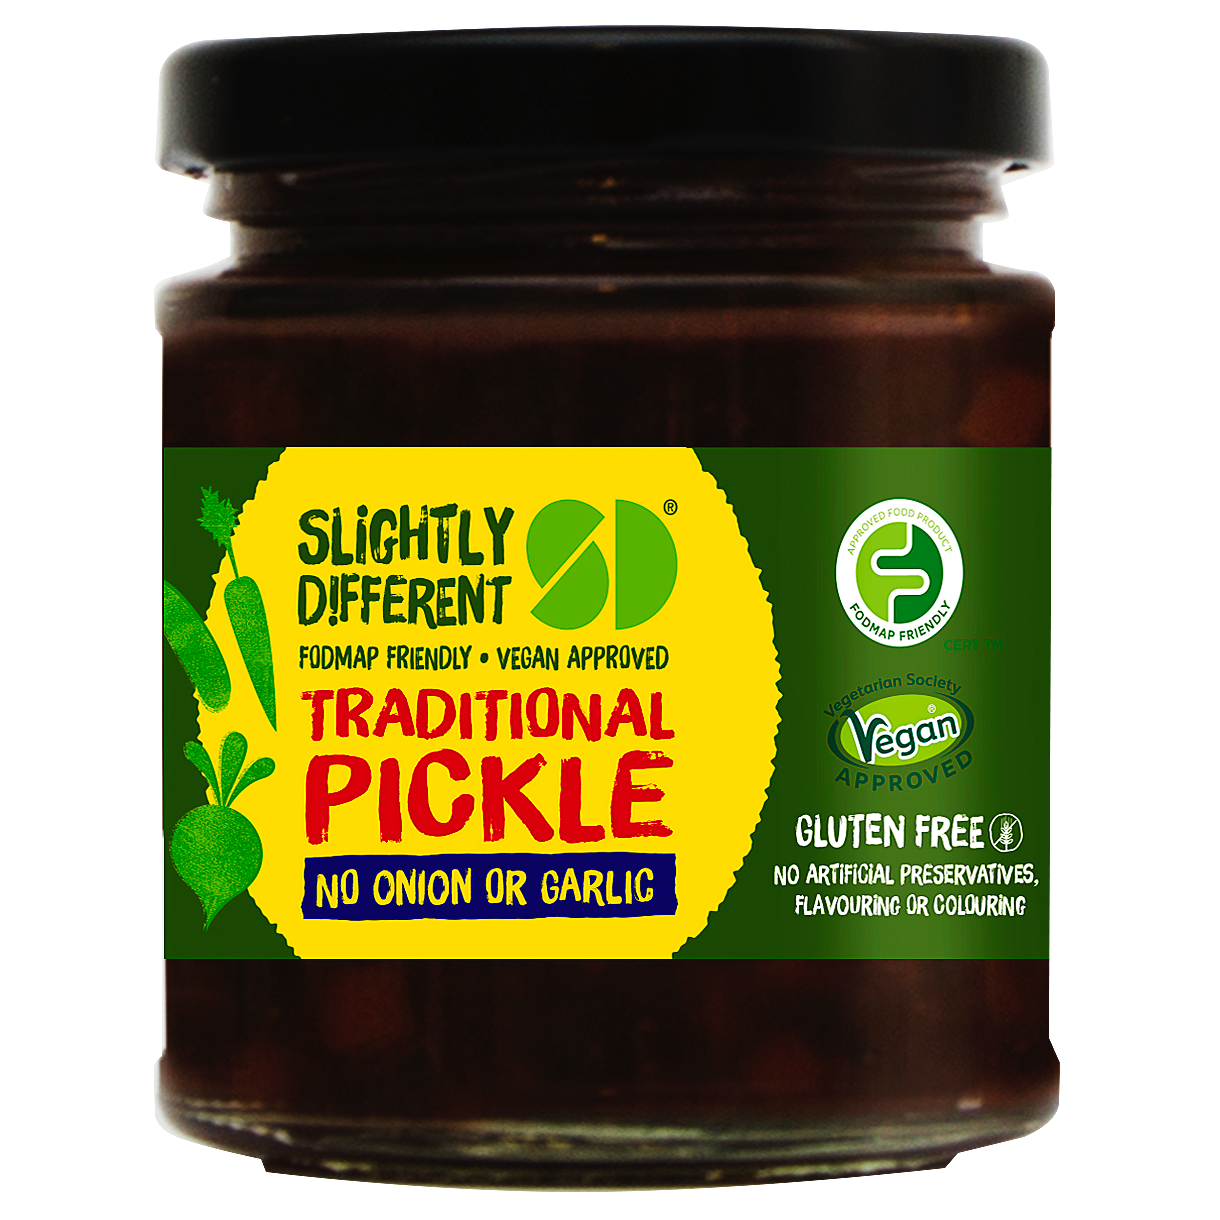 A jar of Slightly Different's Traditional Pickle